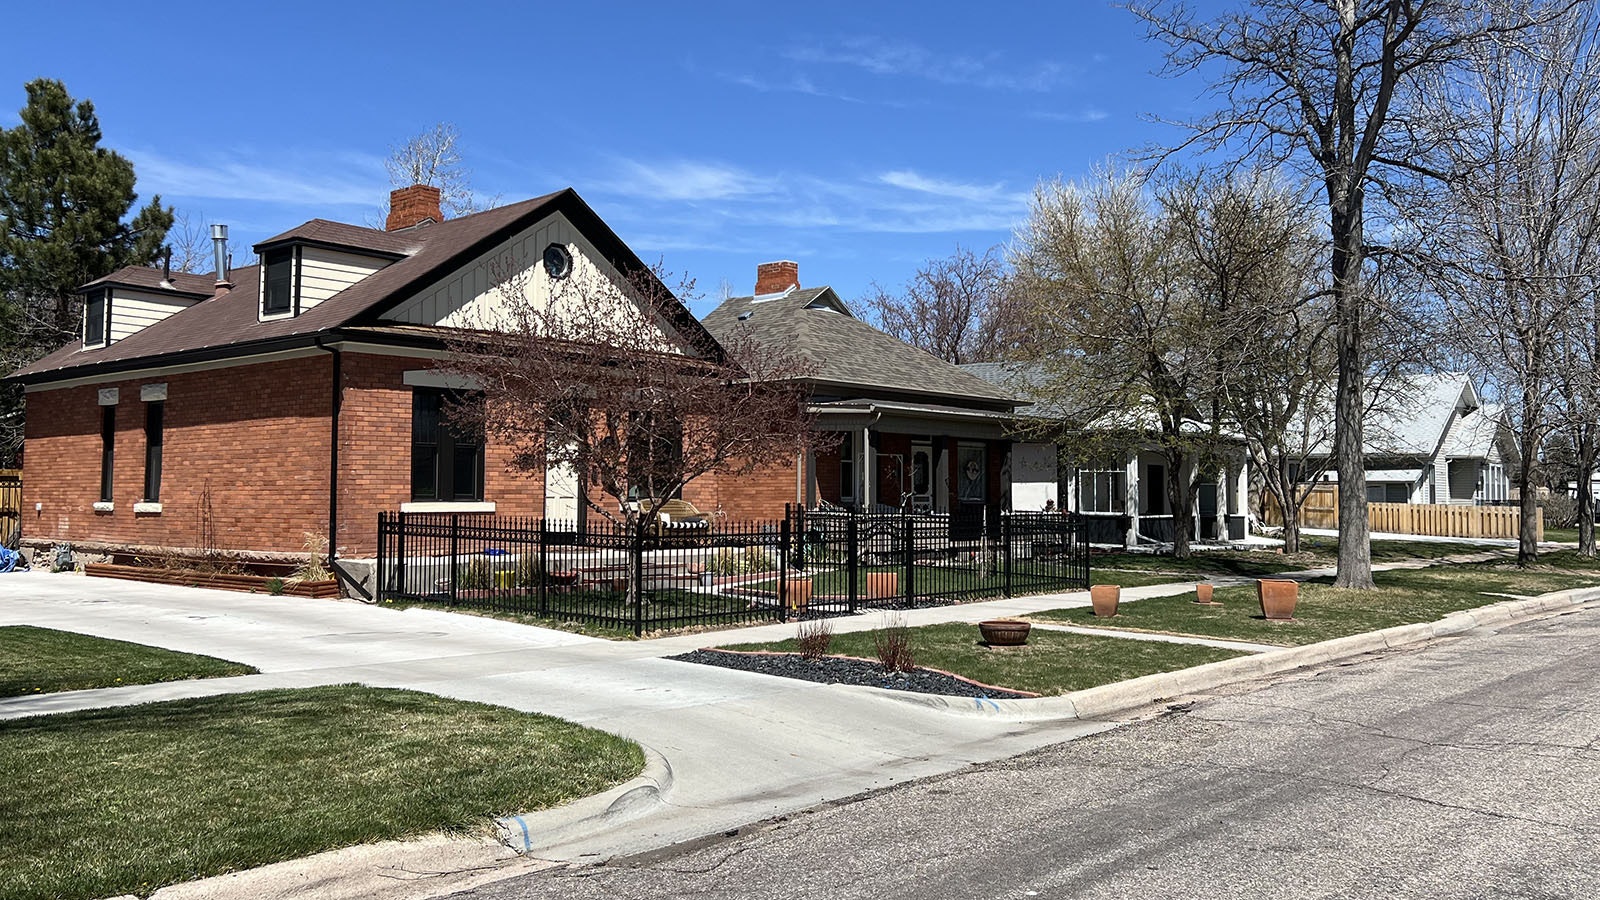 Homeowner insurance in Wyoming has skyrocketed over the past year, doubling and even tripling in some places, like this Cheyenne neighborhood, while others have had their insurance canceled outright.